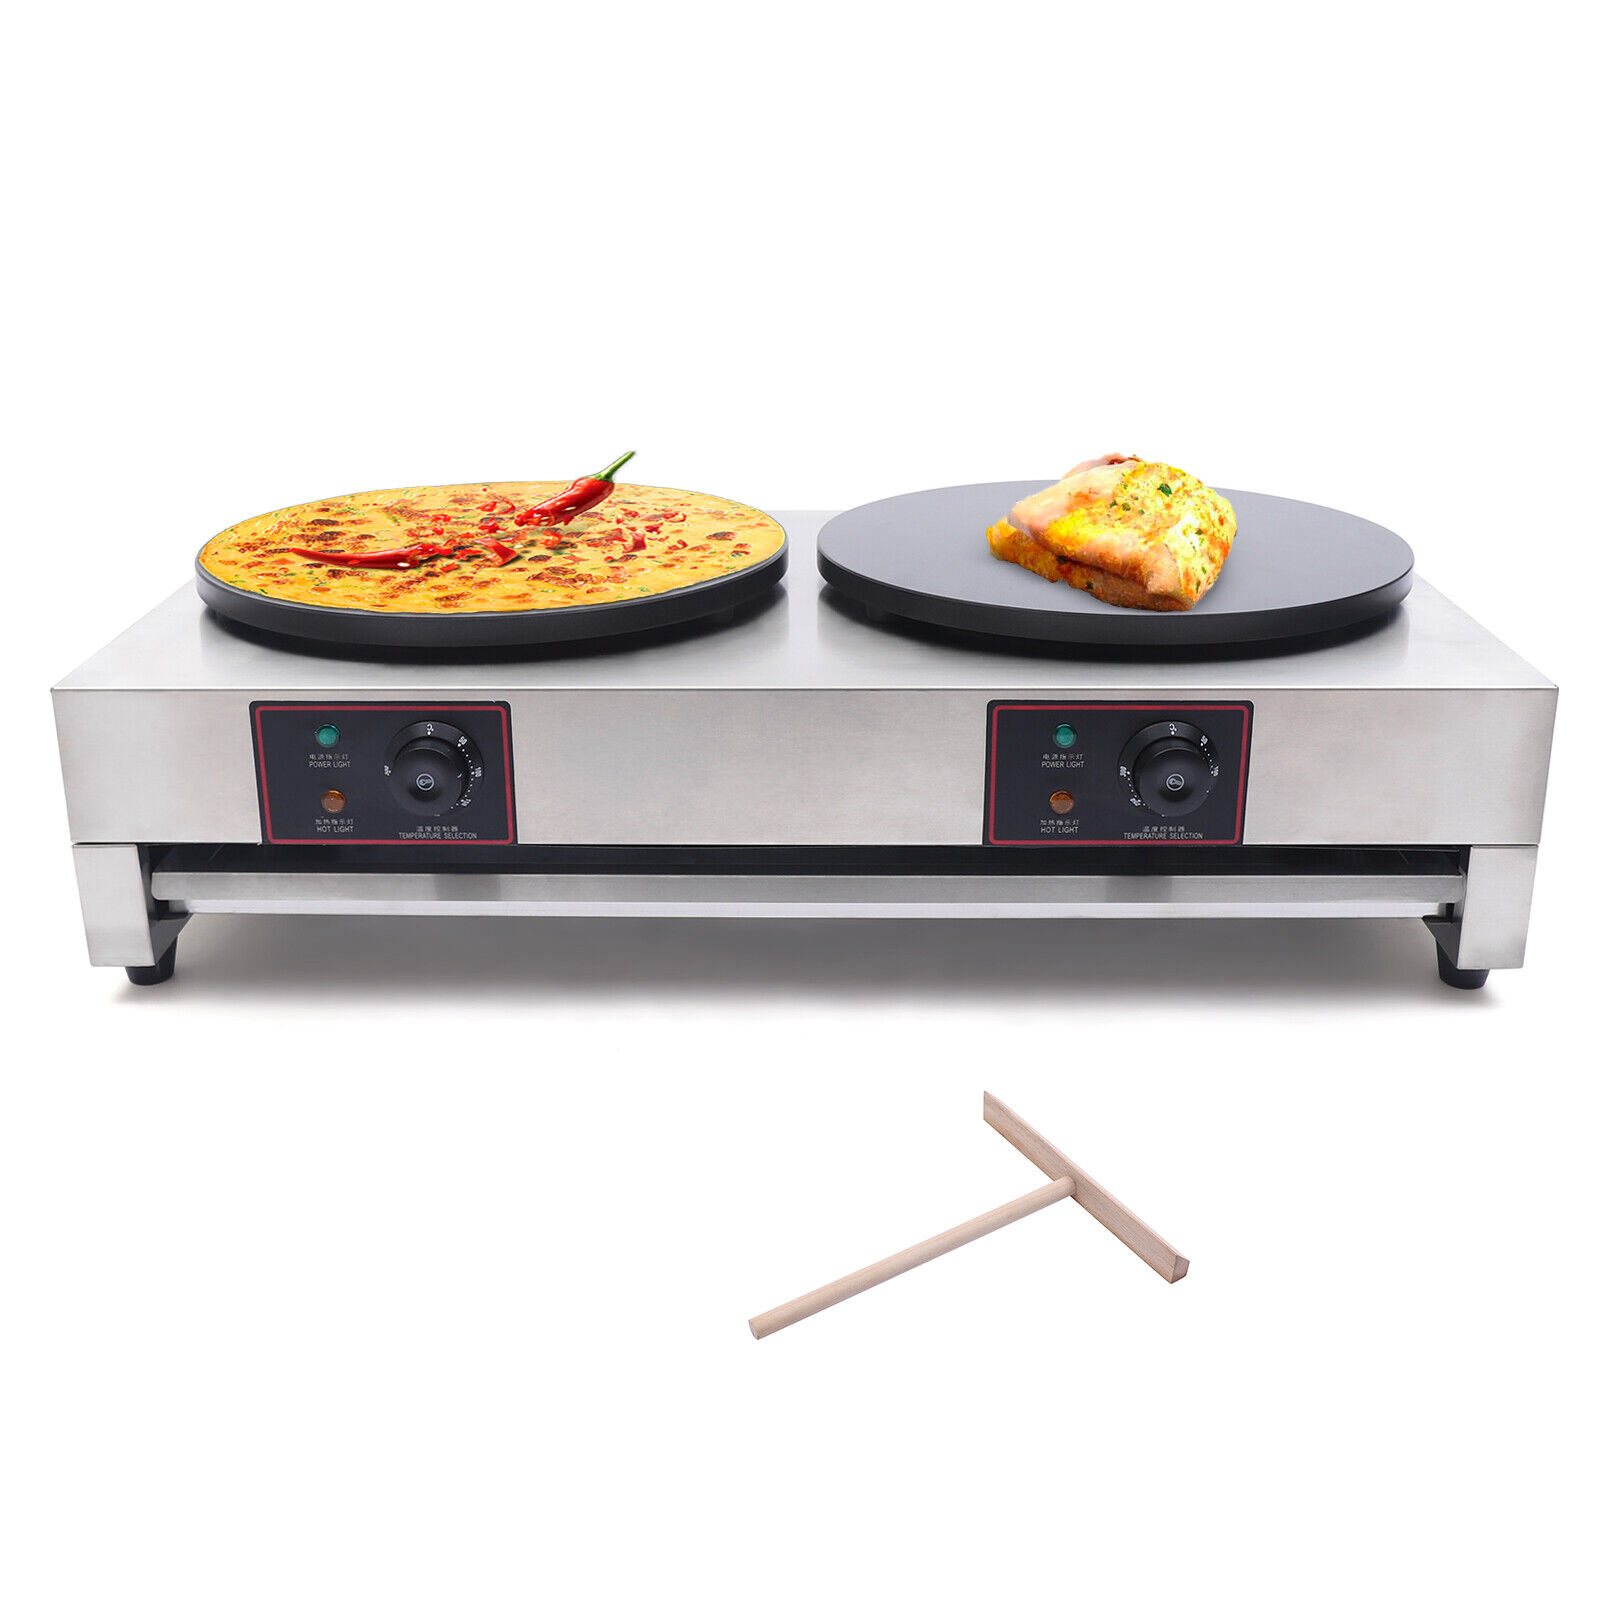 3kw+3kw 40cm 16" Commercial Double Pancake Maker Luxury Electric Crepe Unbranded Does Not Apply - фотография #16